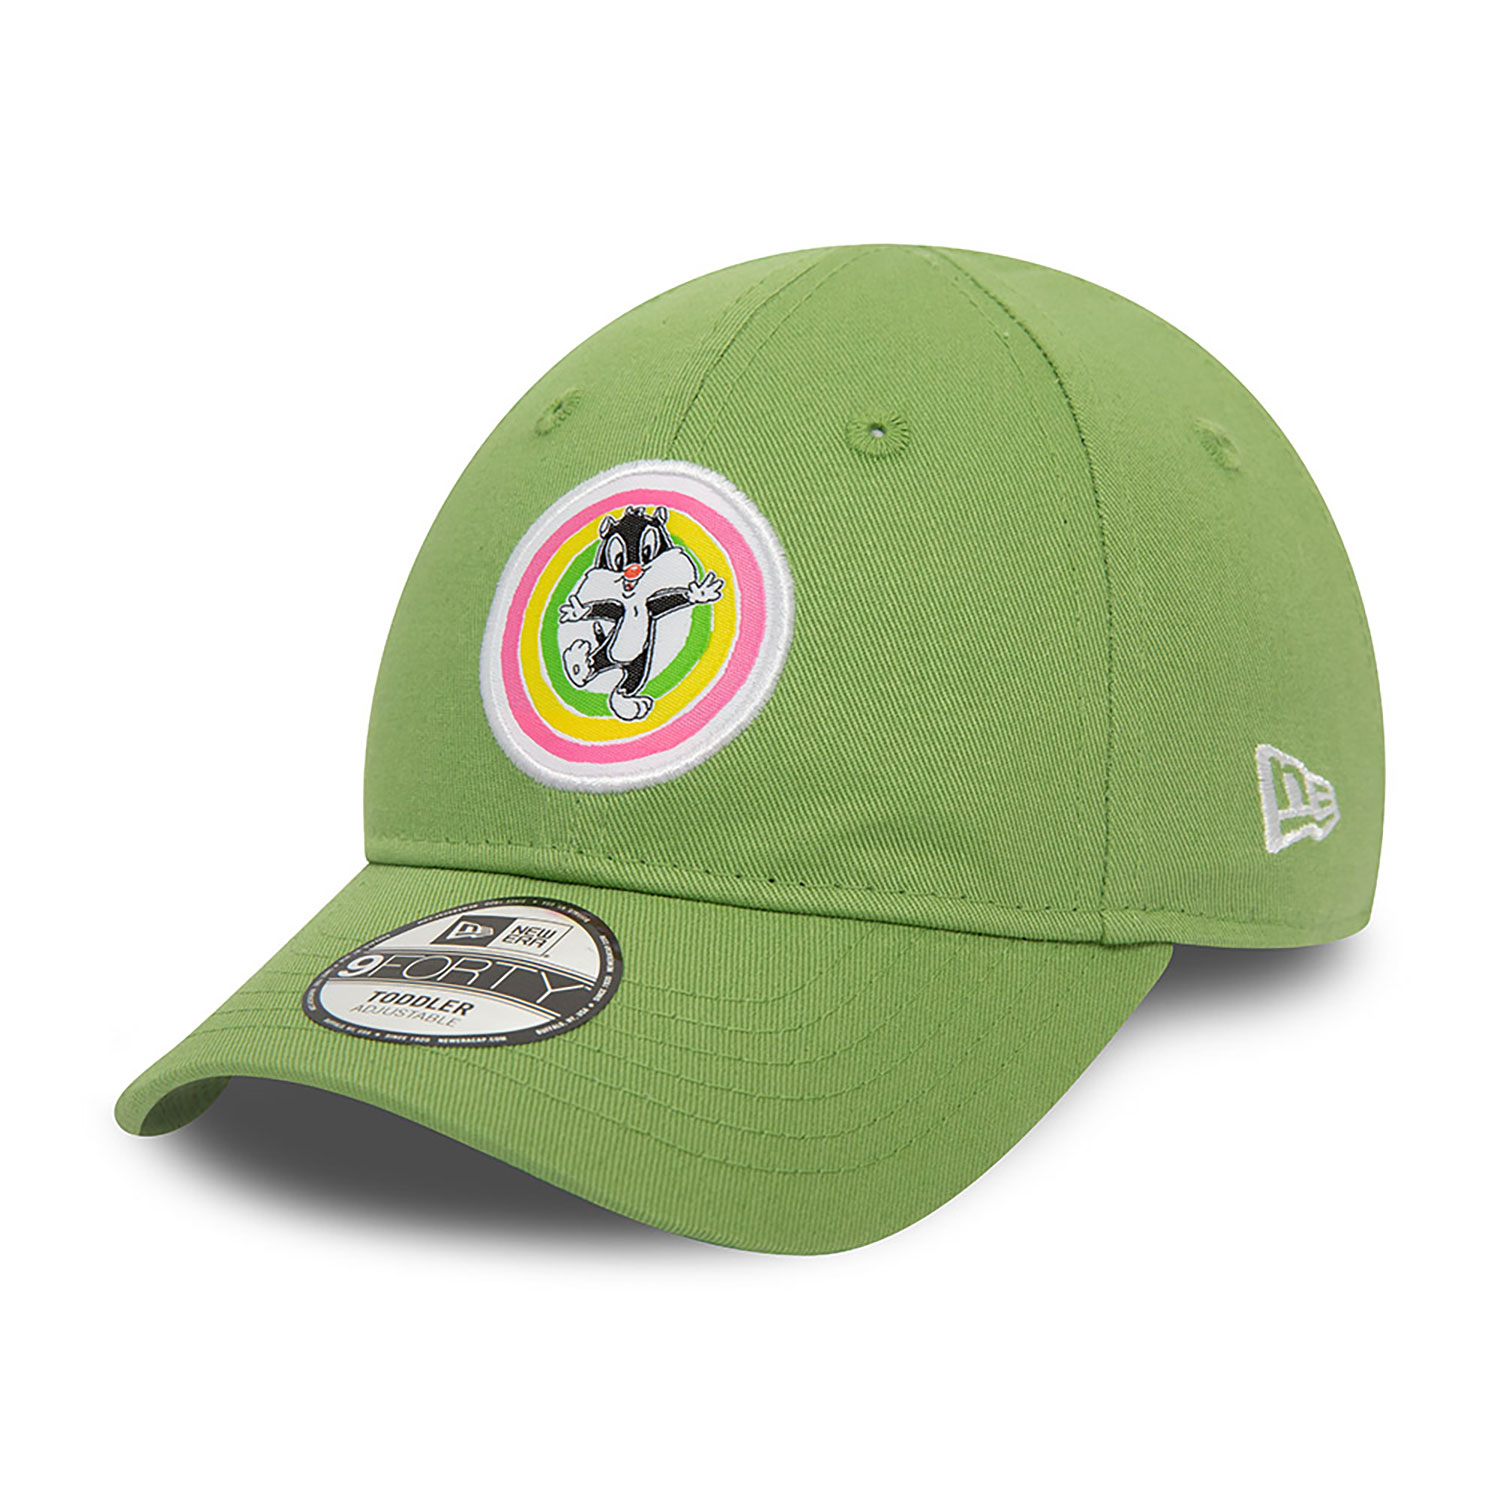 Sylvester Toddler Looney Tunes Green 9FORTY Adjustable Cap